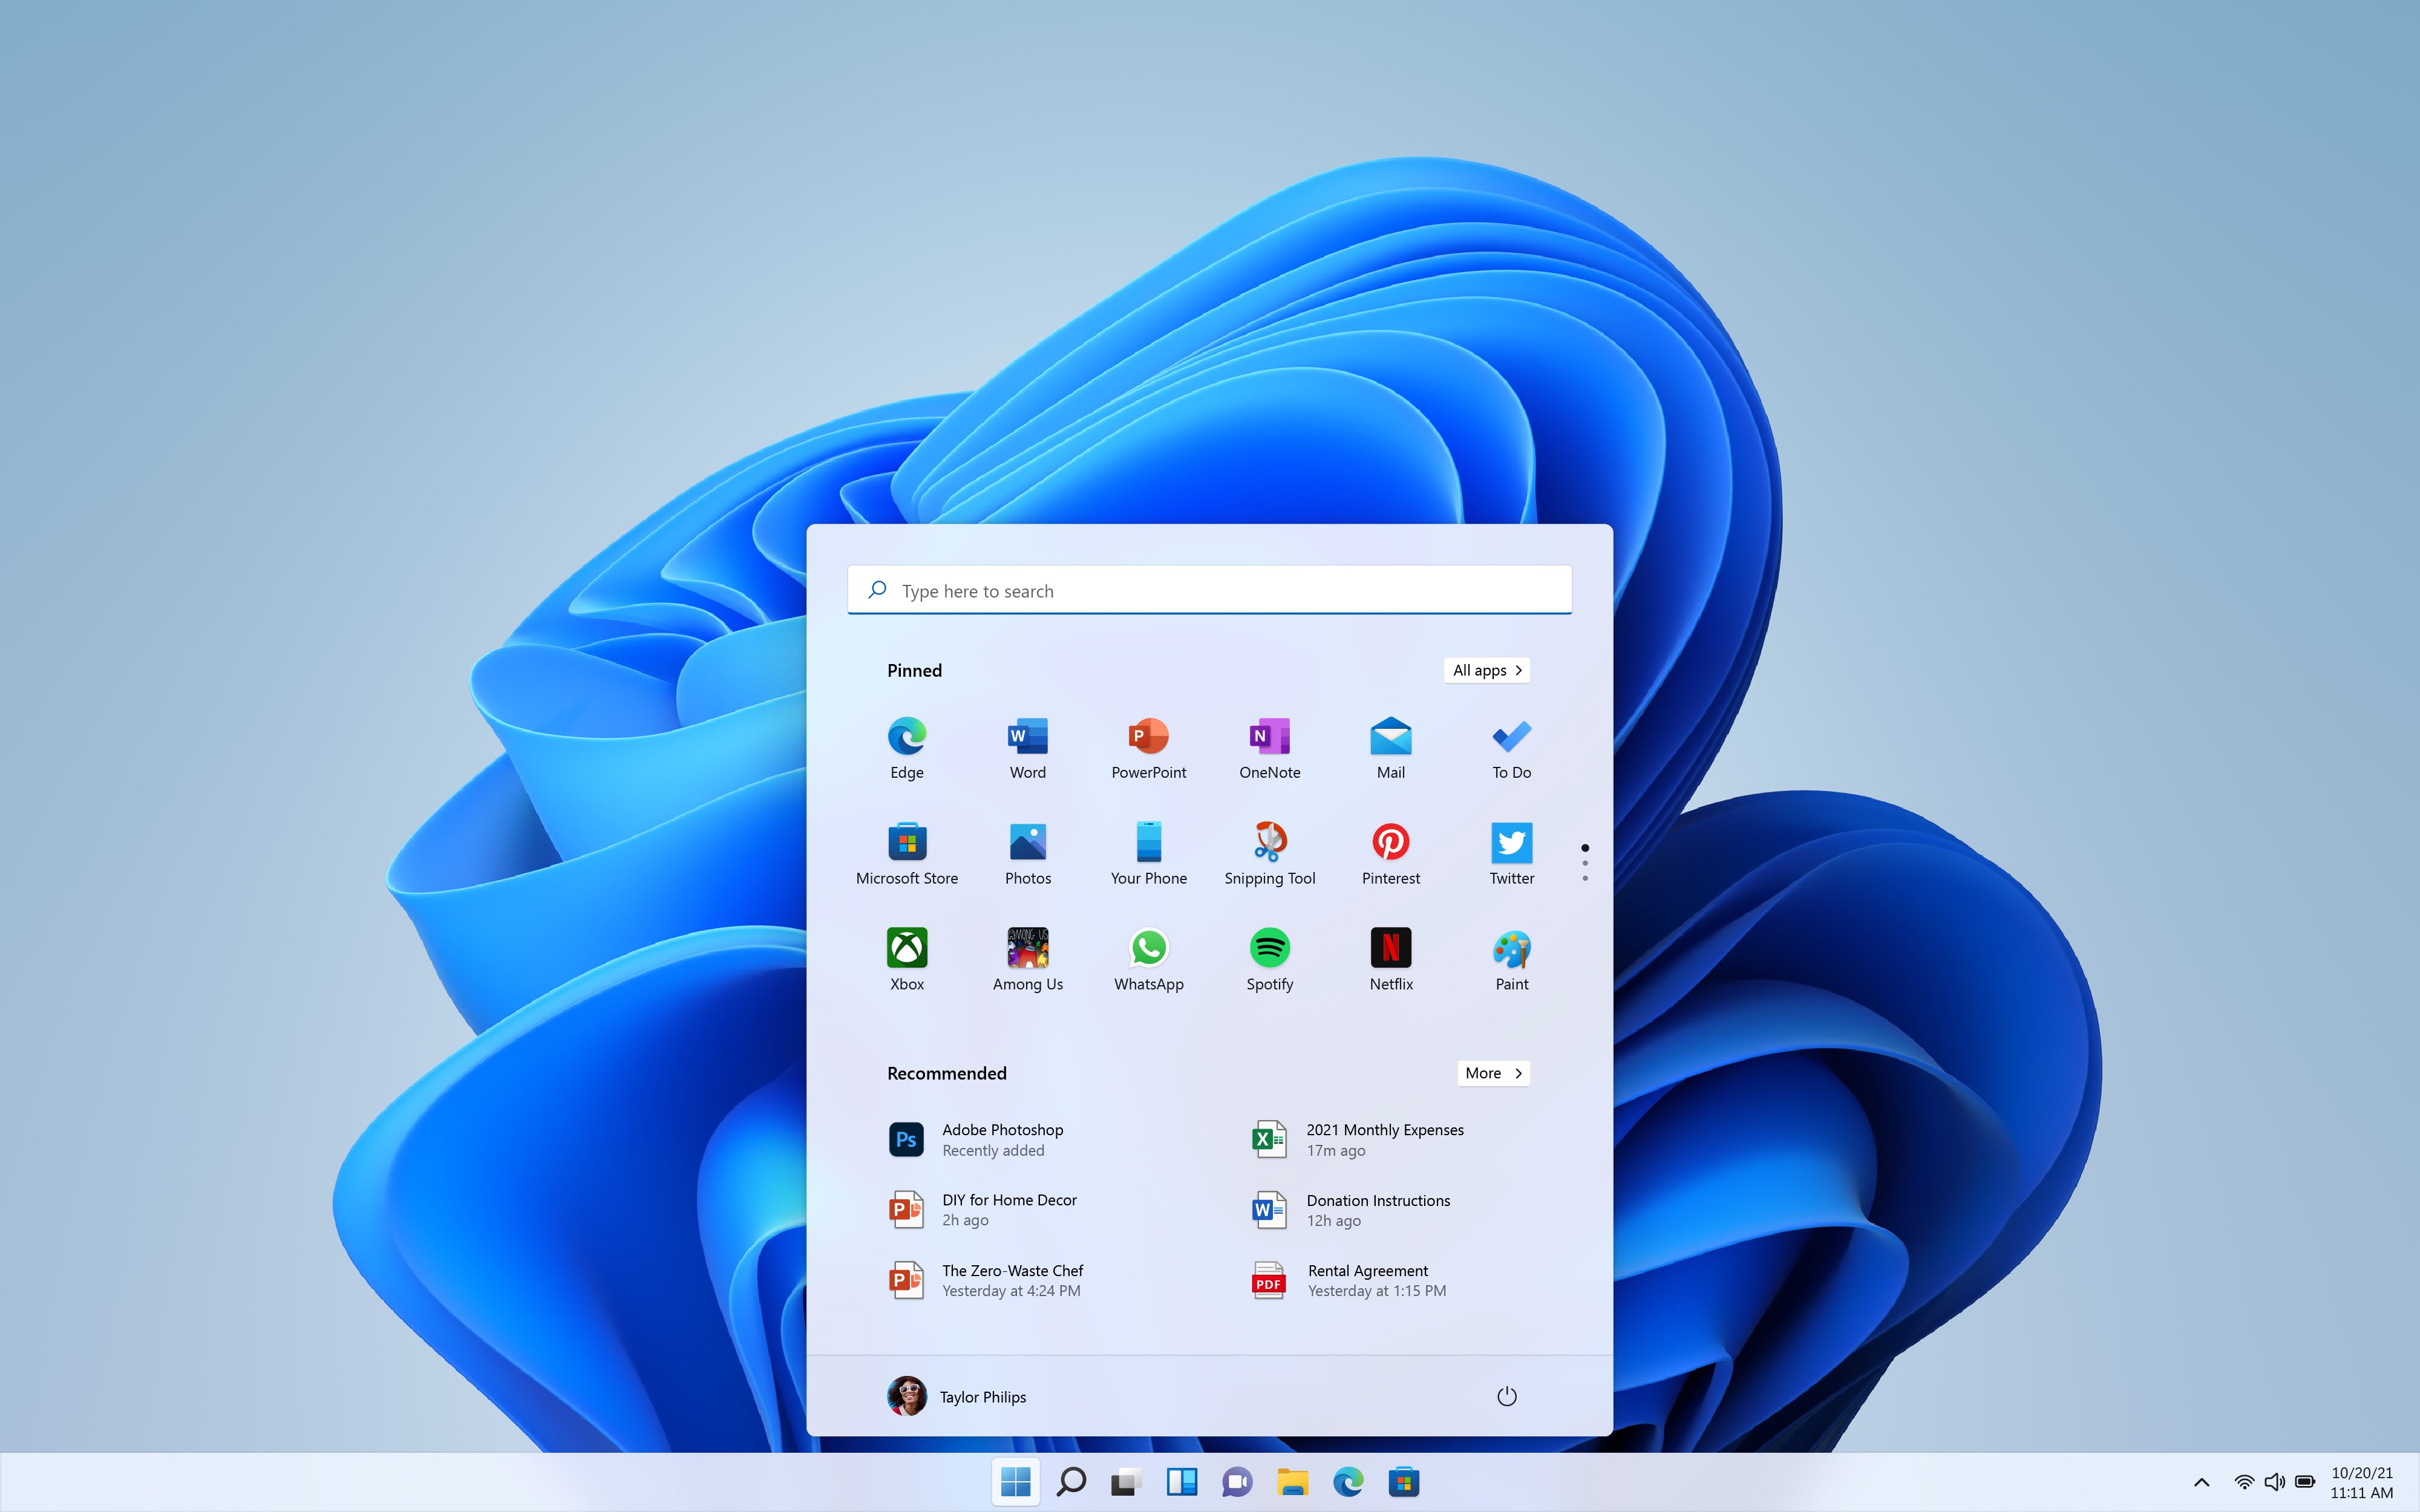 A promotional image from. Microsoft showing the Windows 11 desktop with light theme and the Start menu at the bottom center